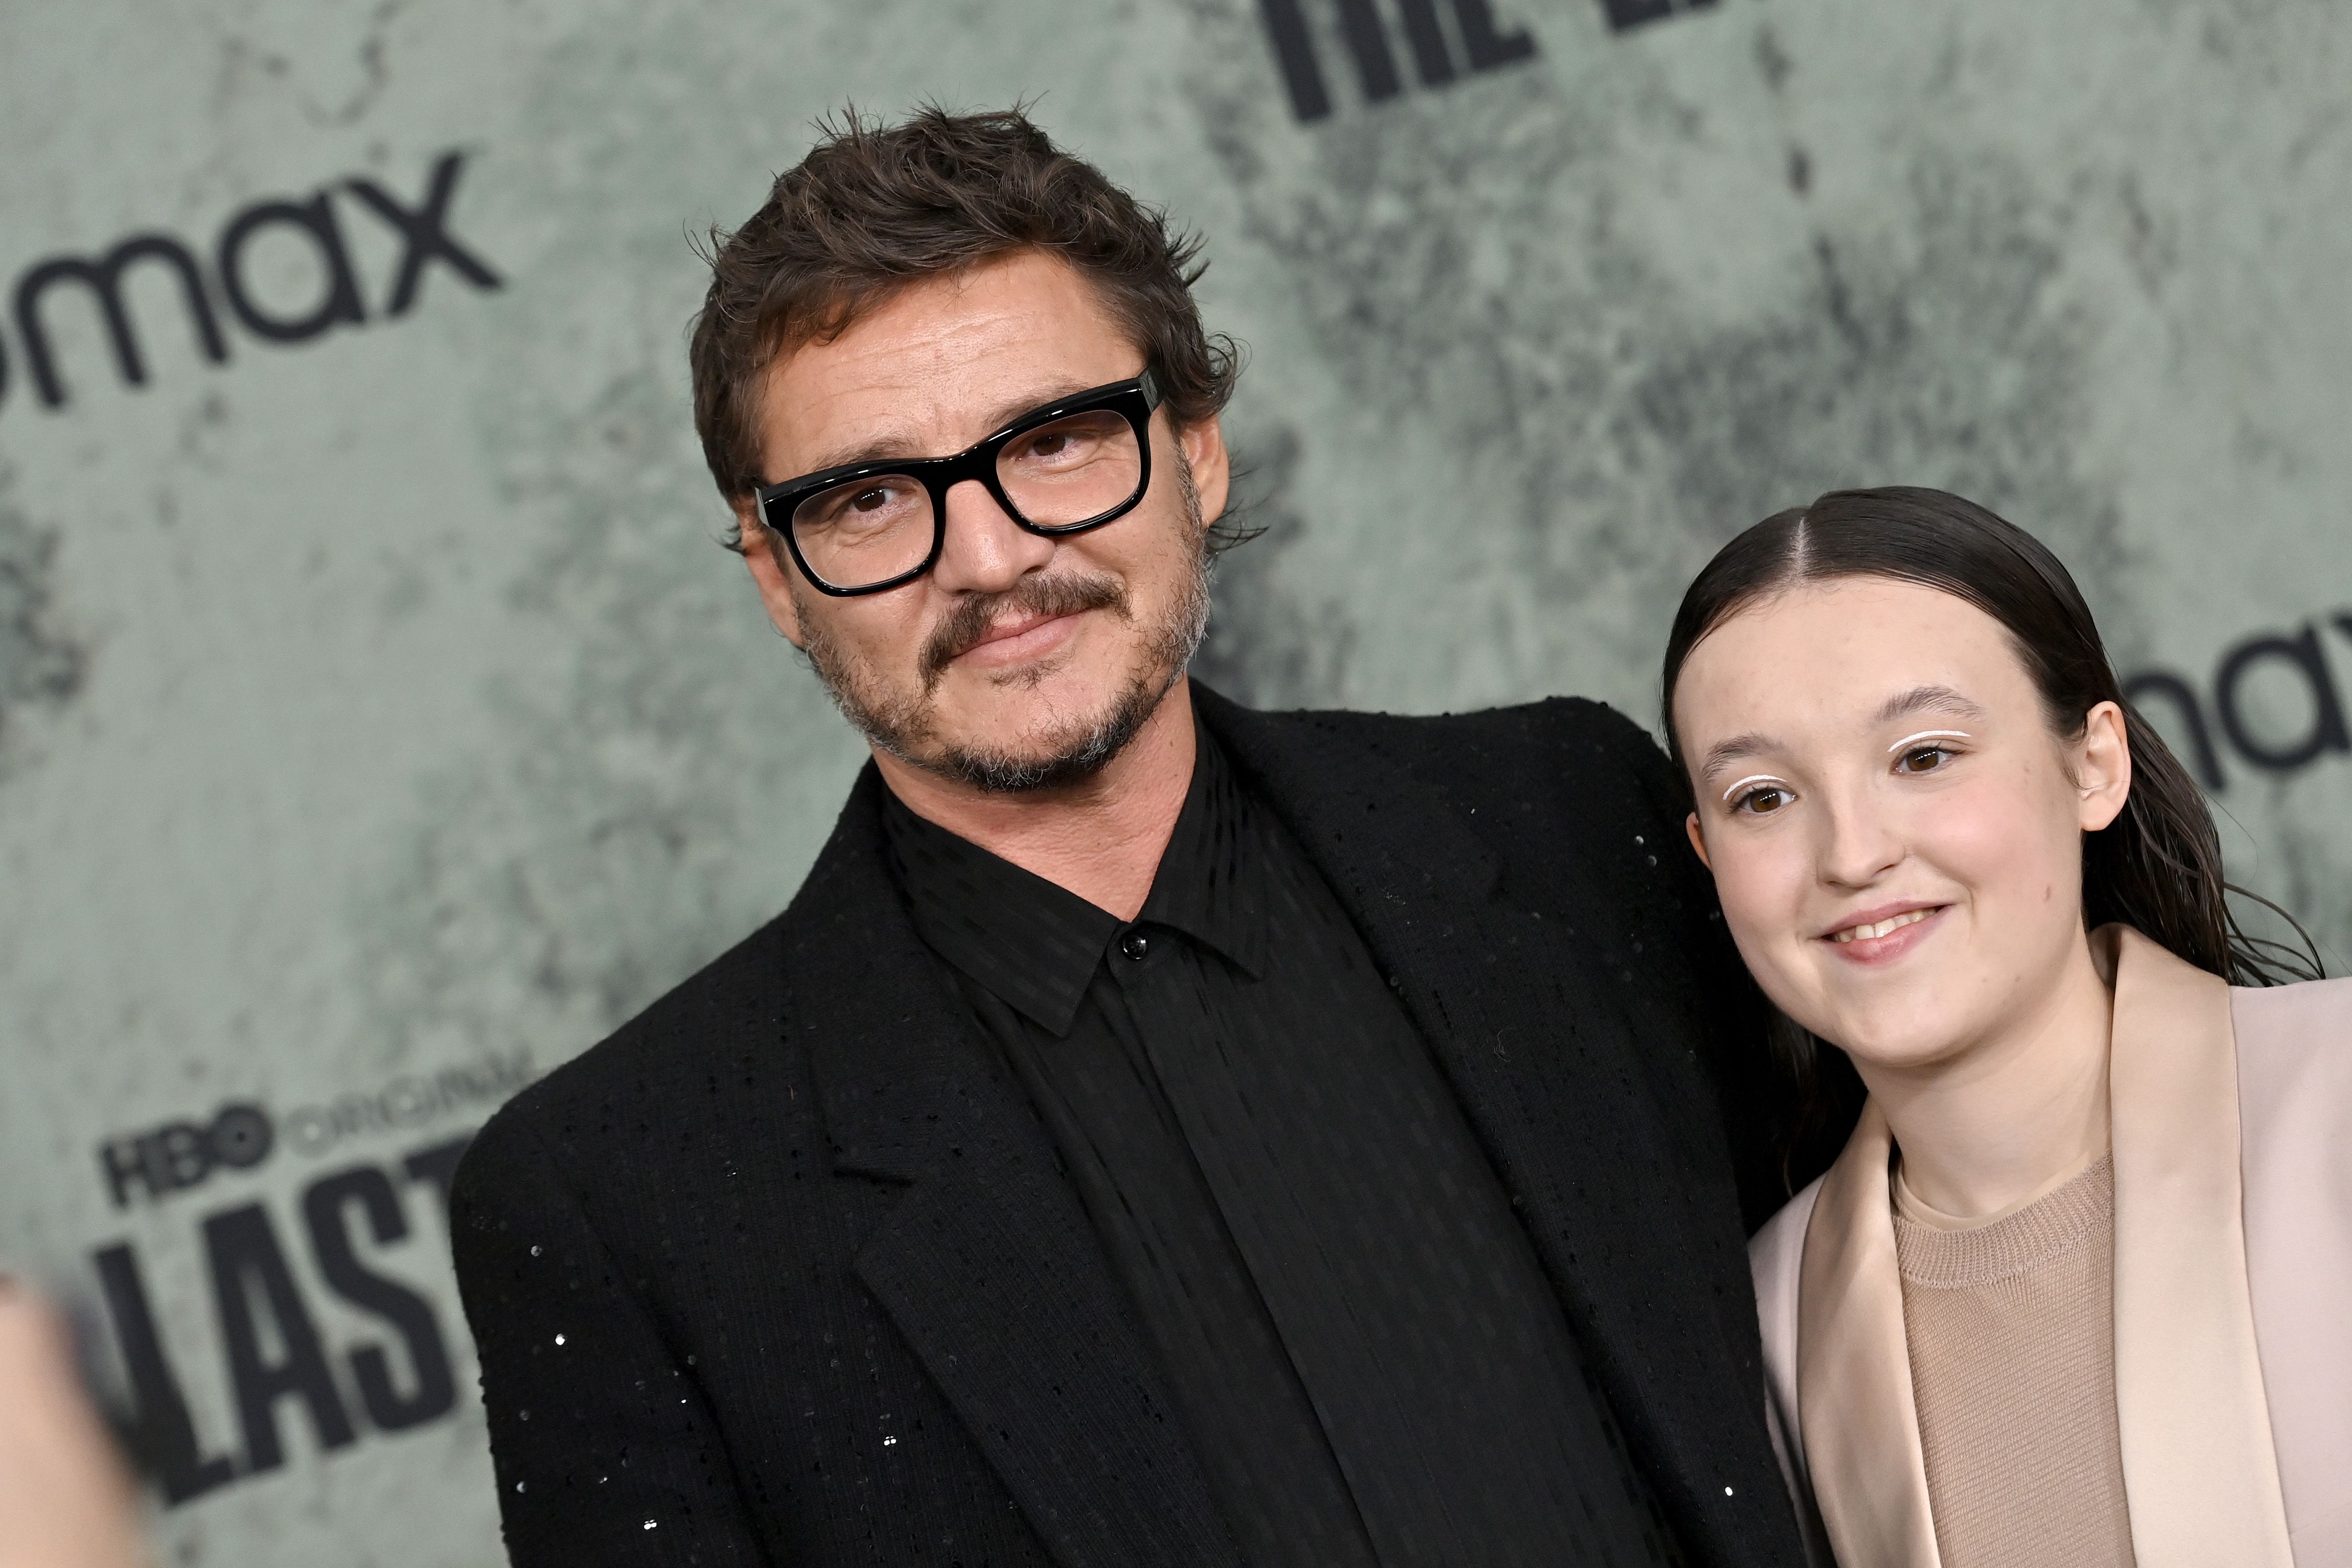 Joel played by Pedro Pascal  Official Website for the HBO Series